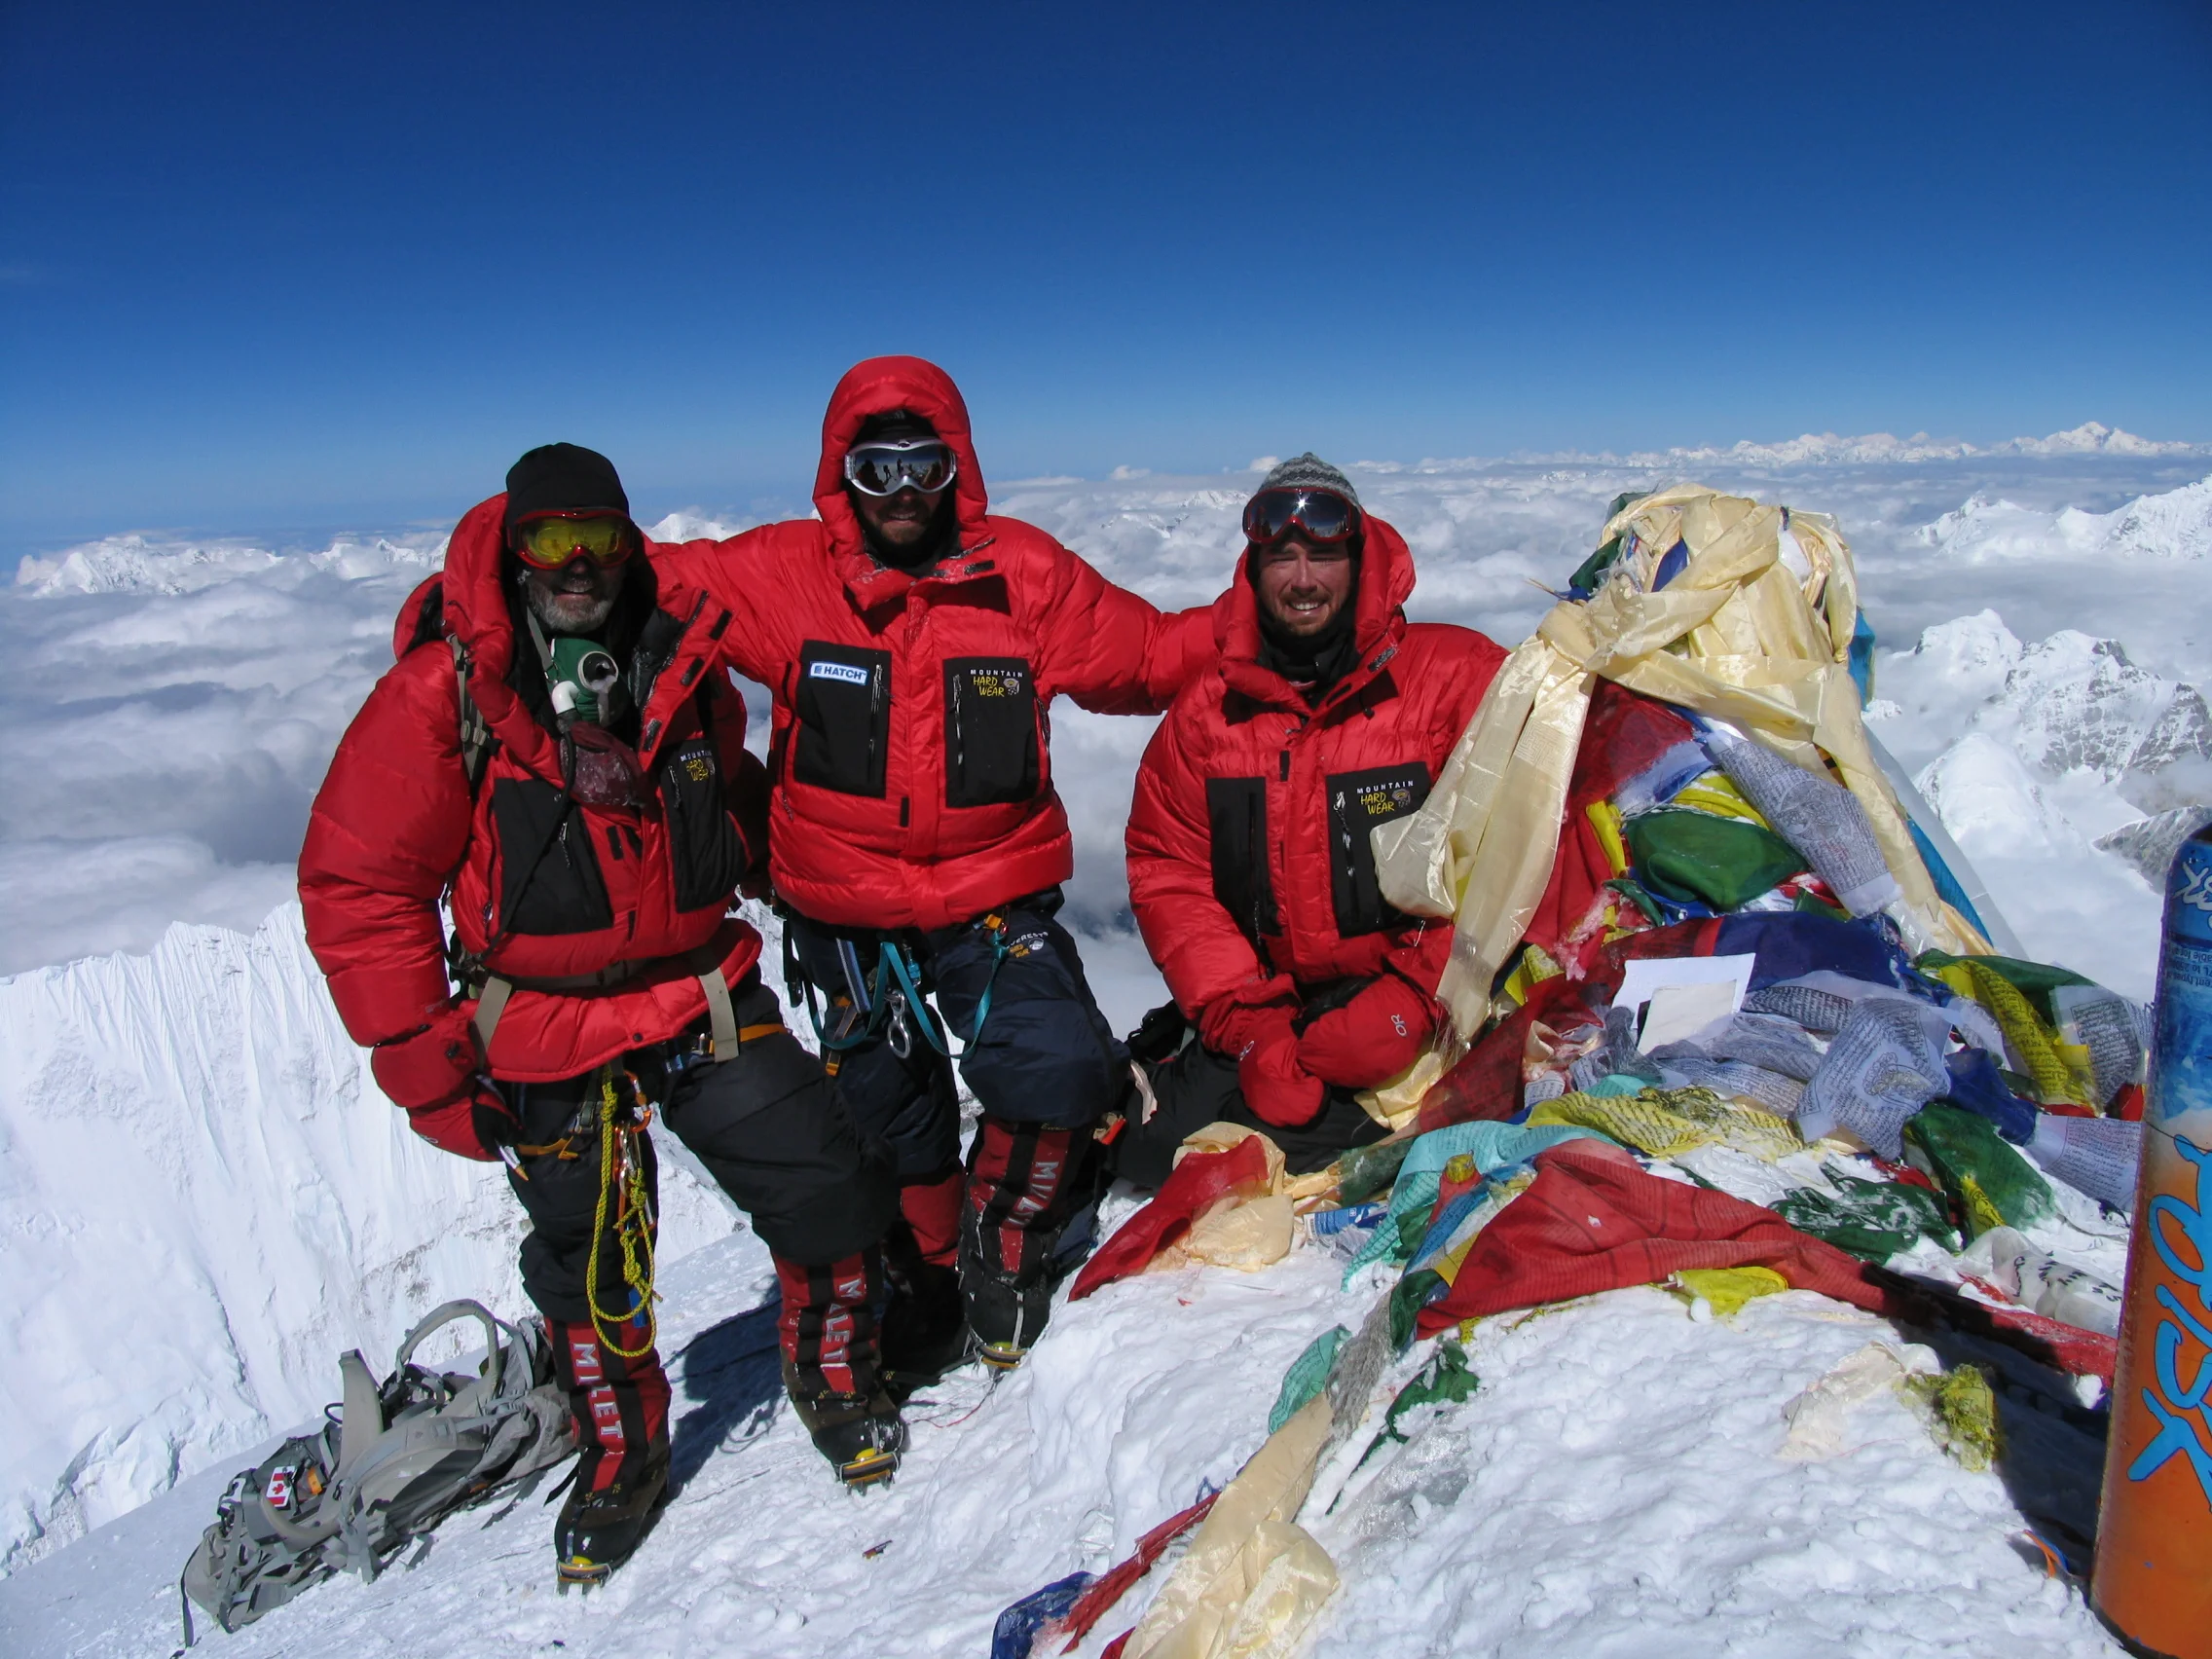 Dan, Alan and Adam Mallory. at the summit of Mount Everest